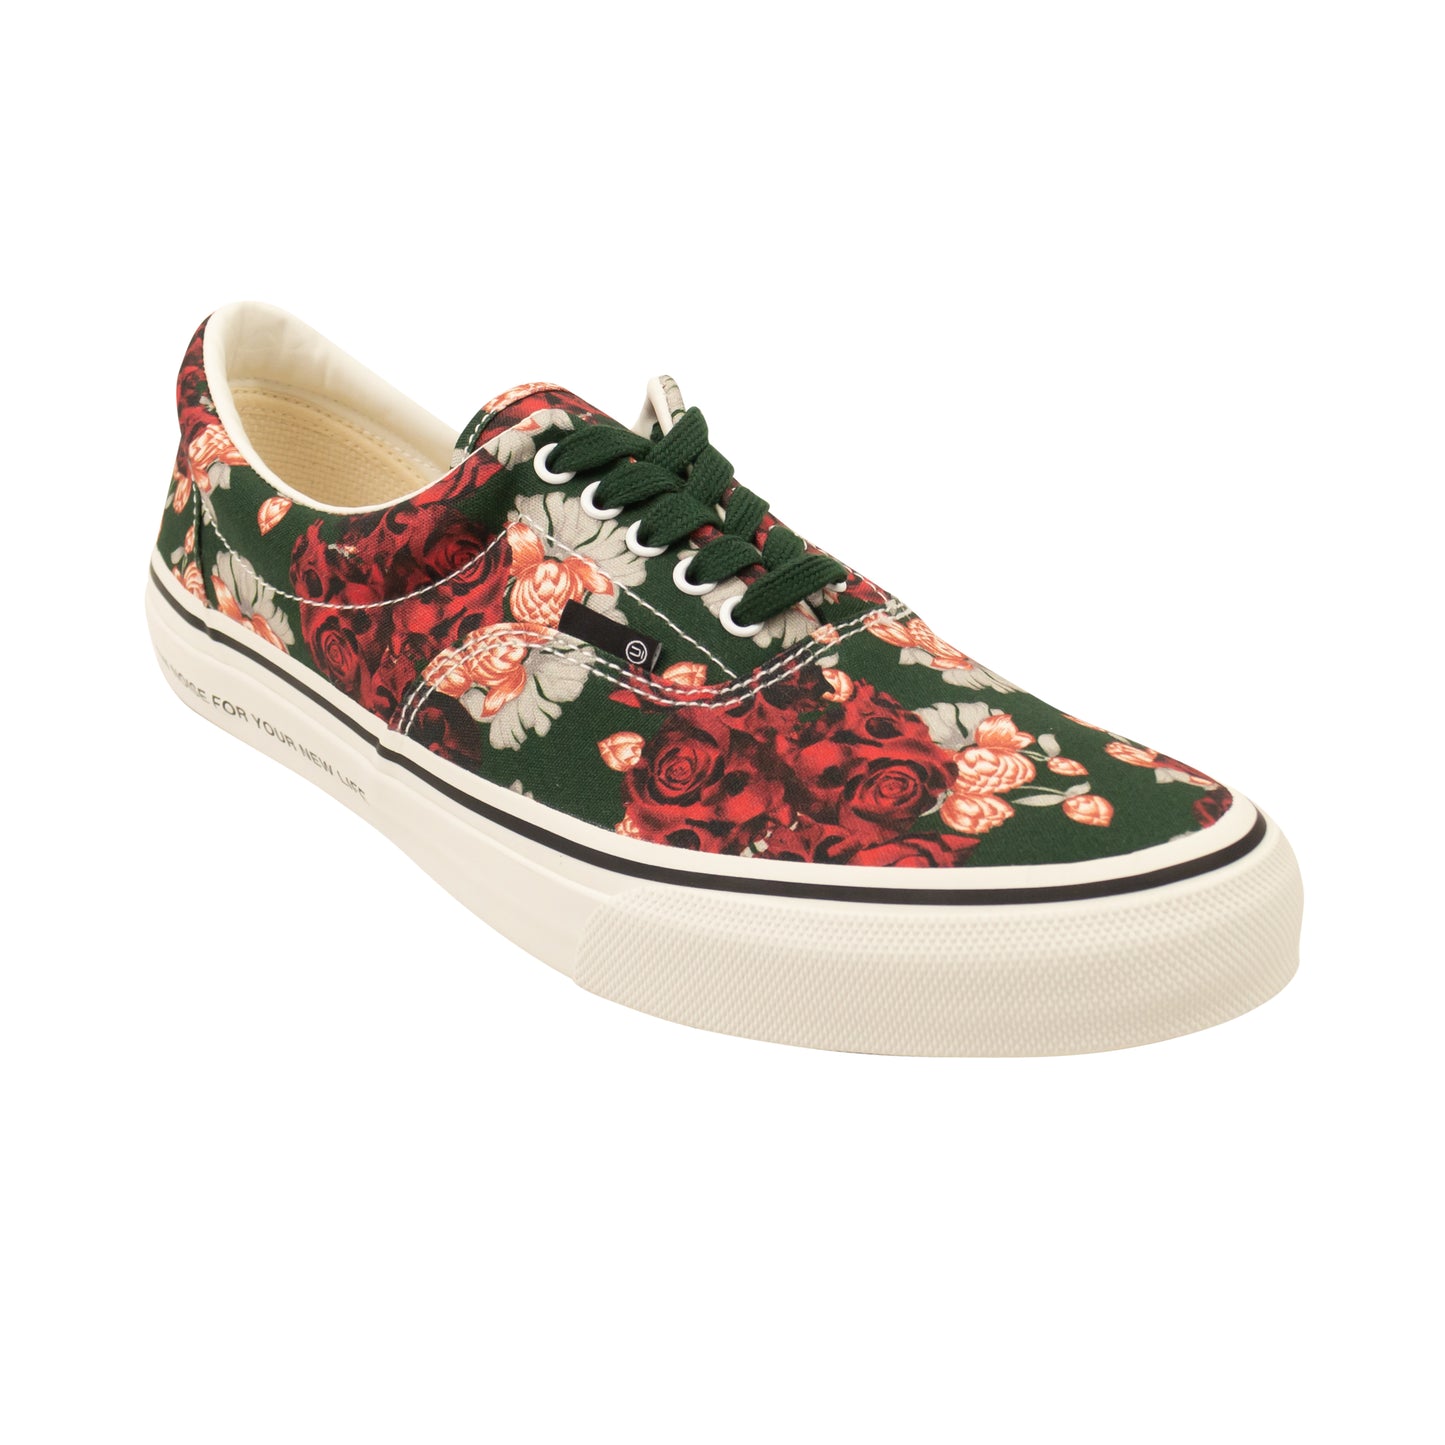 Undercover Floral Print Sneakers - Green